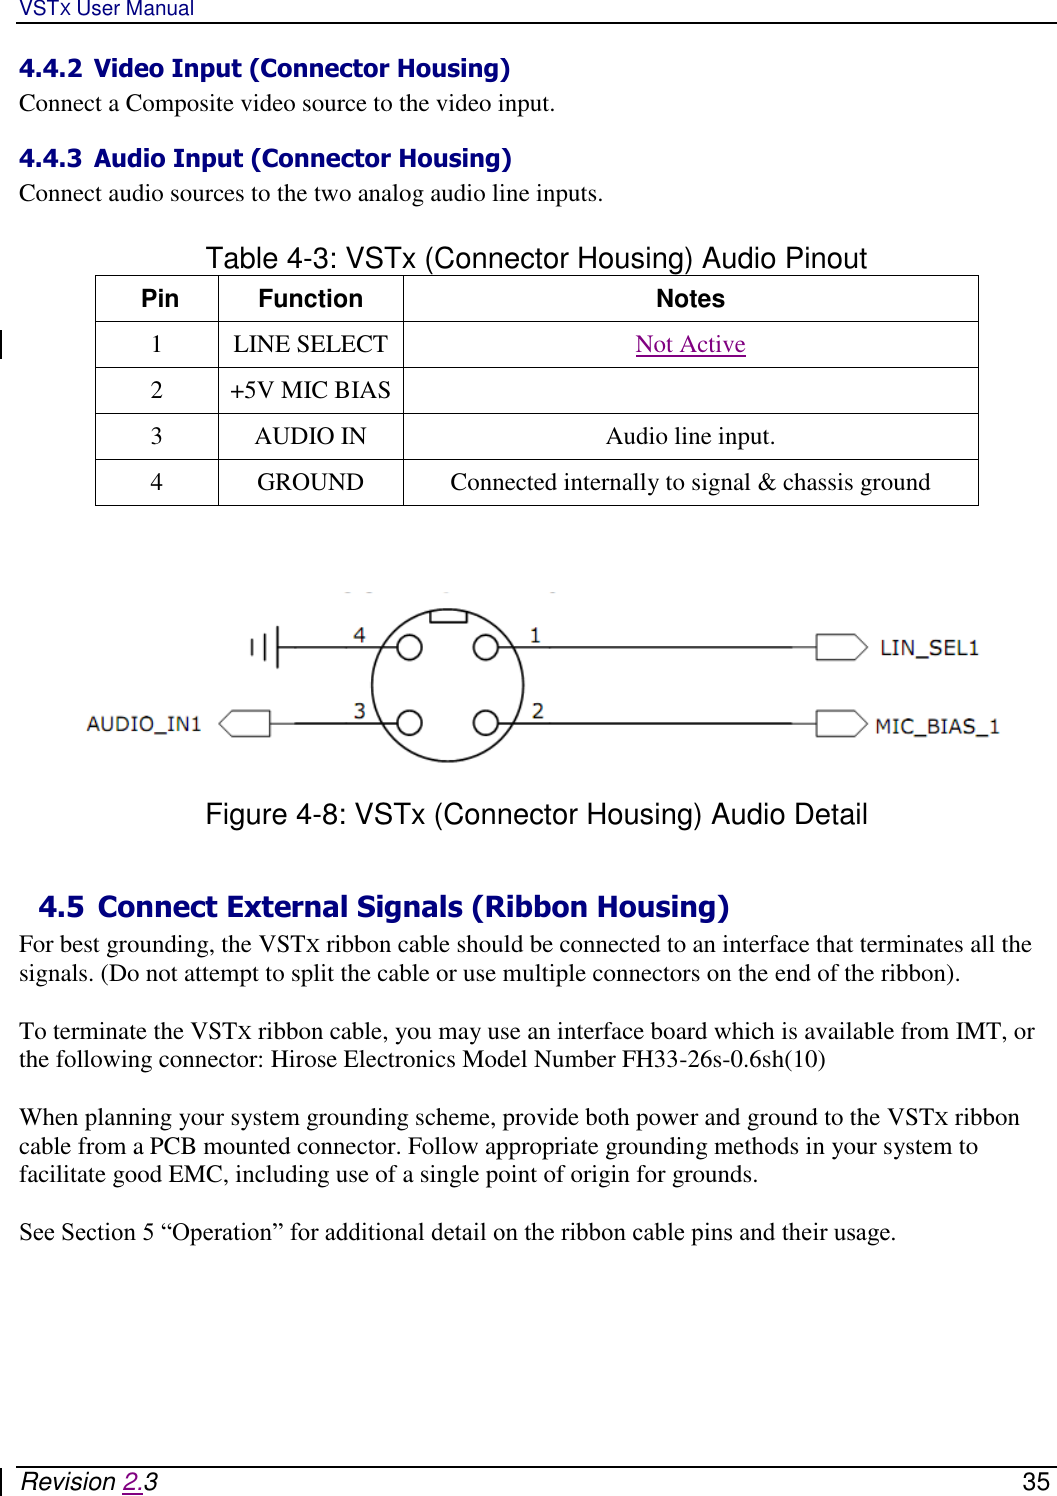 VSTX User Manual   Revision 2.3    35 4.4.2 Video Input (Connector Housing) Connect a Composite video source to the video input.  4.4.3 Audio Input (Connector Housing) Connect audio sources to the two analog audio line inputs.   Table 4-3: VSTx (Connector Housing) Audio Pinout  Pin Function Notes 1 LINE SELECT Not Active 2 +5V MIC BIAS  3 AUDIO IN Audio line input. 4 GROUND Connected internally to signal &amp; chassis ground      Figure 4-8: VSTx (Connector Housing) Audio Detail   4.5 Connect External Signals (Ribbon Housing)  For best grounding, the VSTX ribbon cable should be connected to an interface that terminates all the  signals. (Do not attempt to split the cable or use multiple connectors on the end of the ribbon).  To terminate the VSTX ribbon cable, you may use an interface board which is available from IMT, or the following connector: Hirose Electronics Model Number FH33-26s-0.6sh(10)  When planning your system grounding scheme, provide both power and ground to the VSTX ribbon cable from a PCB mounted connector. Follow appropriate grounding methods in your system to facilitate good EMC, including use of a single point of origin for grounds.   See Section 5 “Operation” for additional detail on the ribbon cable pins and their usage.   